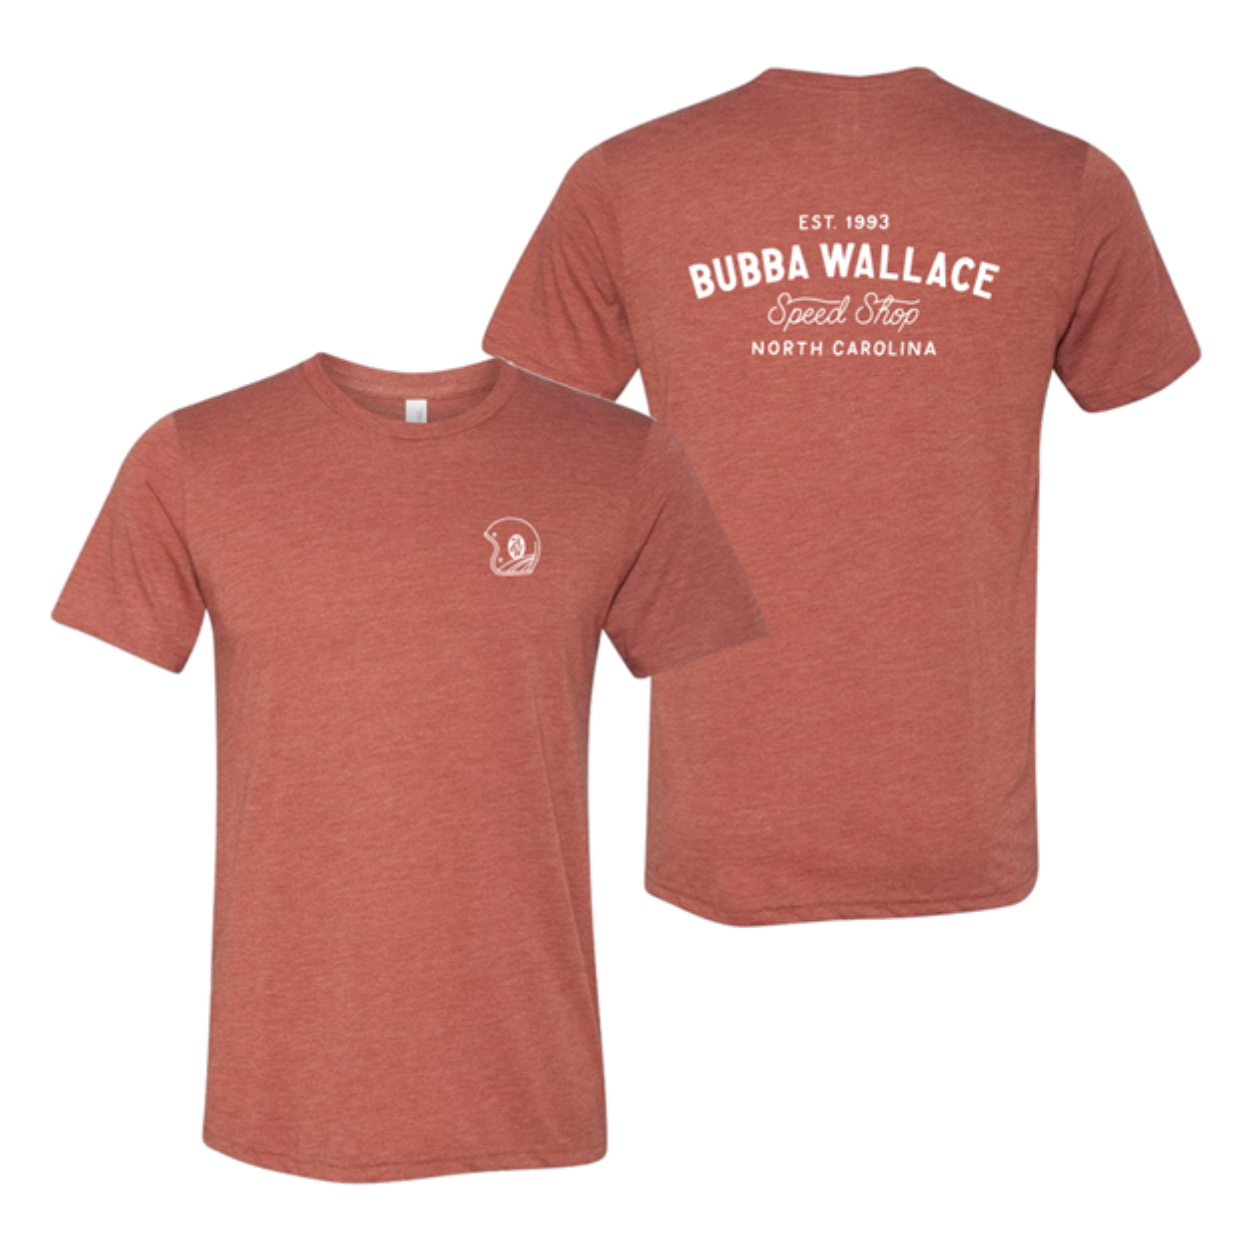 RED BUBBA WALLACE SPEED SHOP TEE